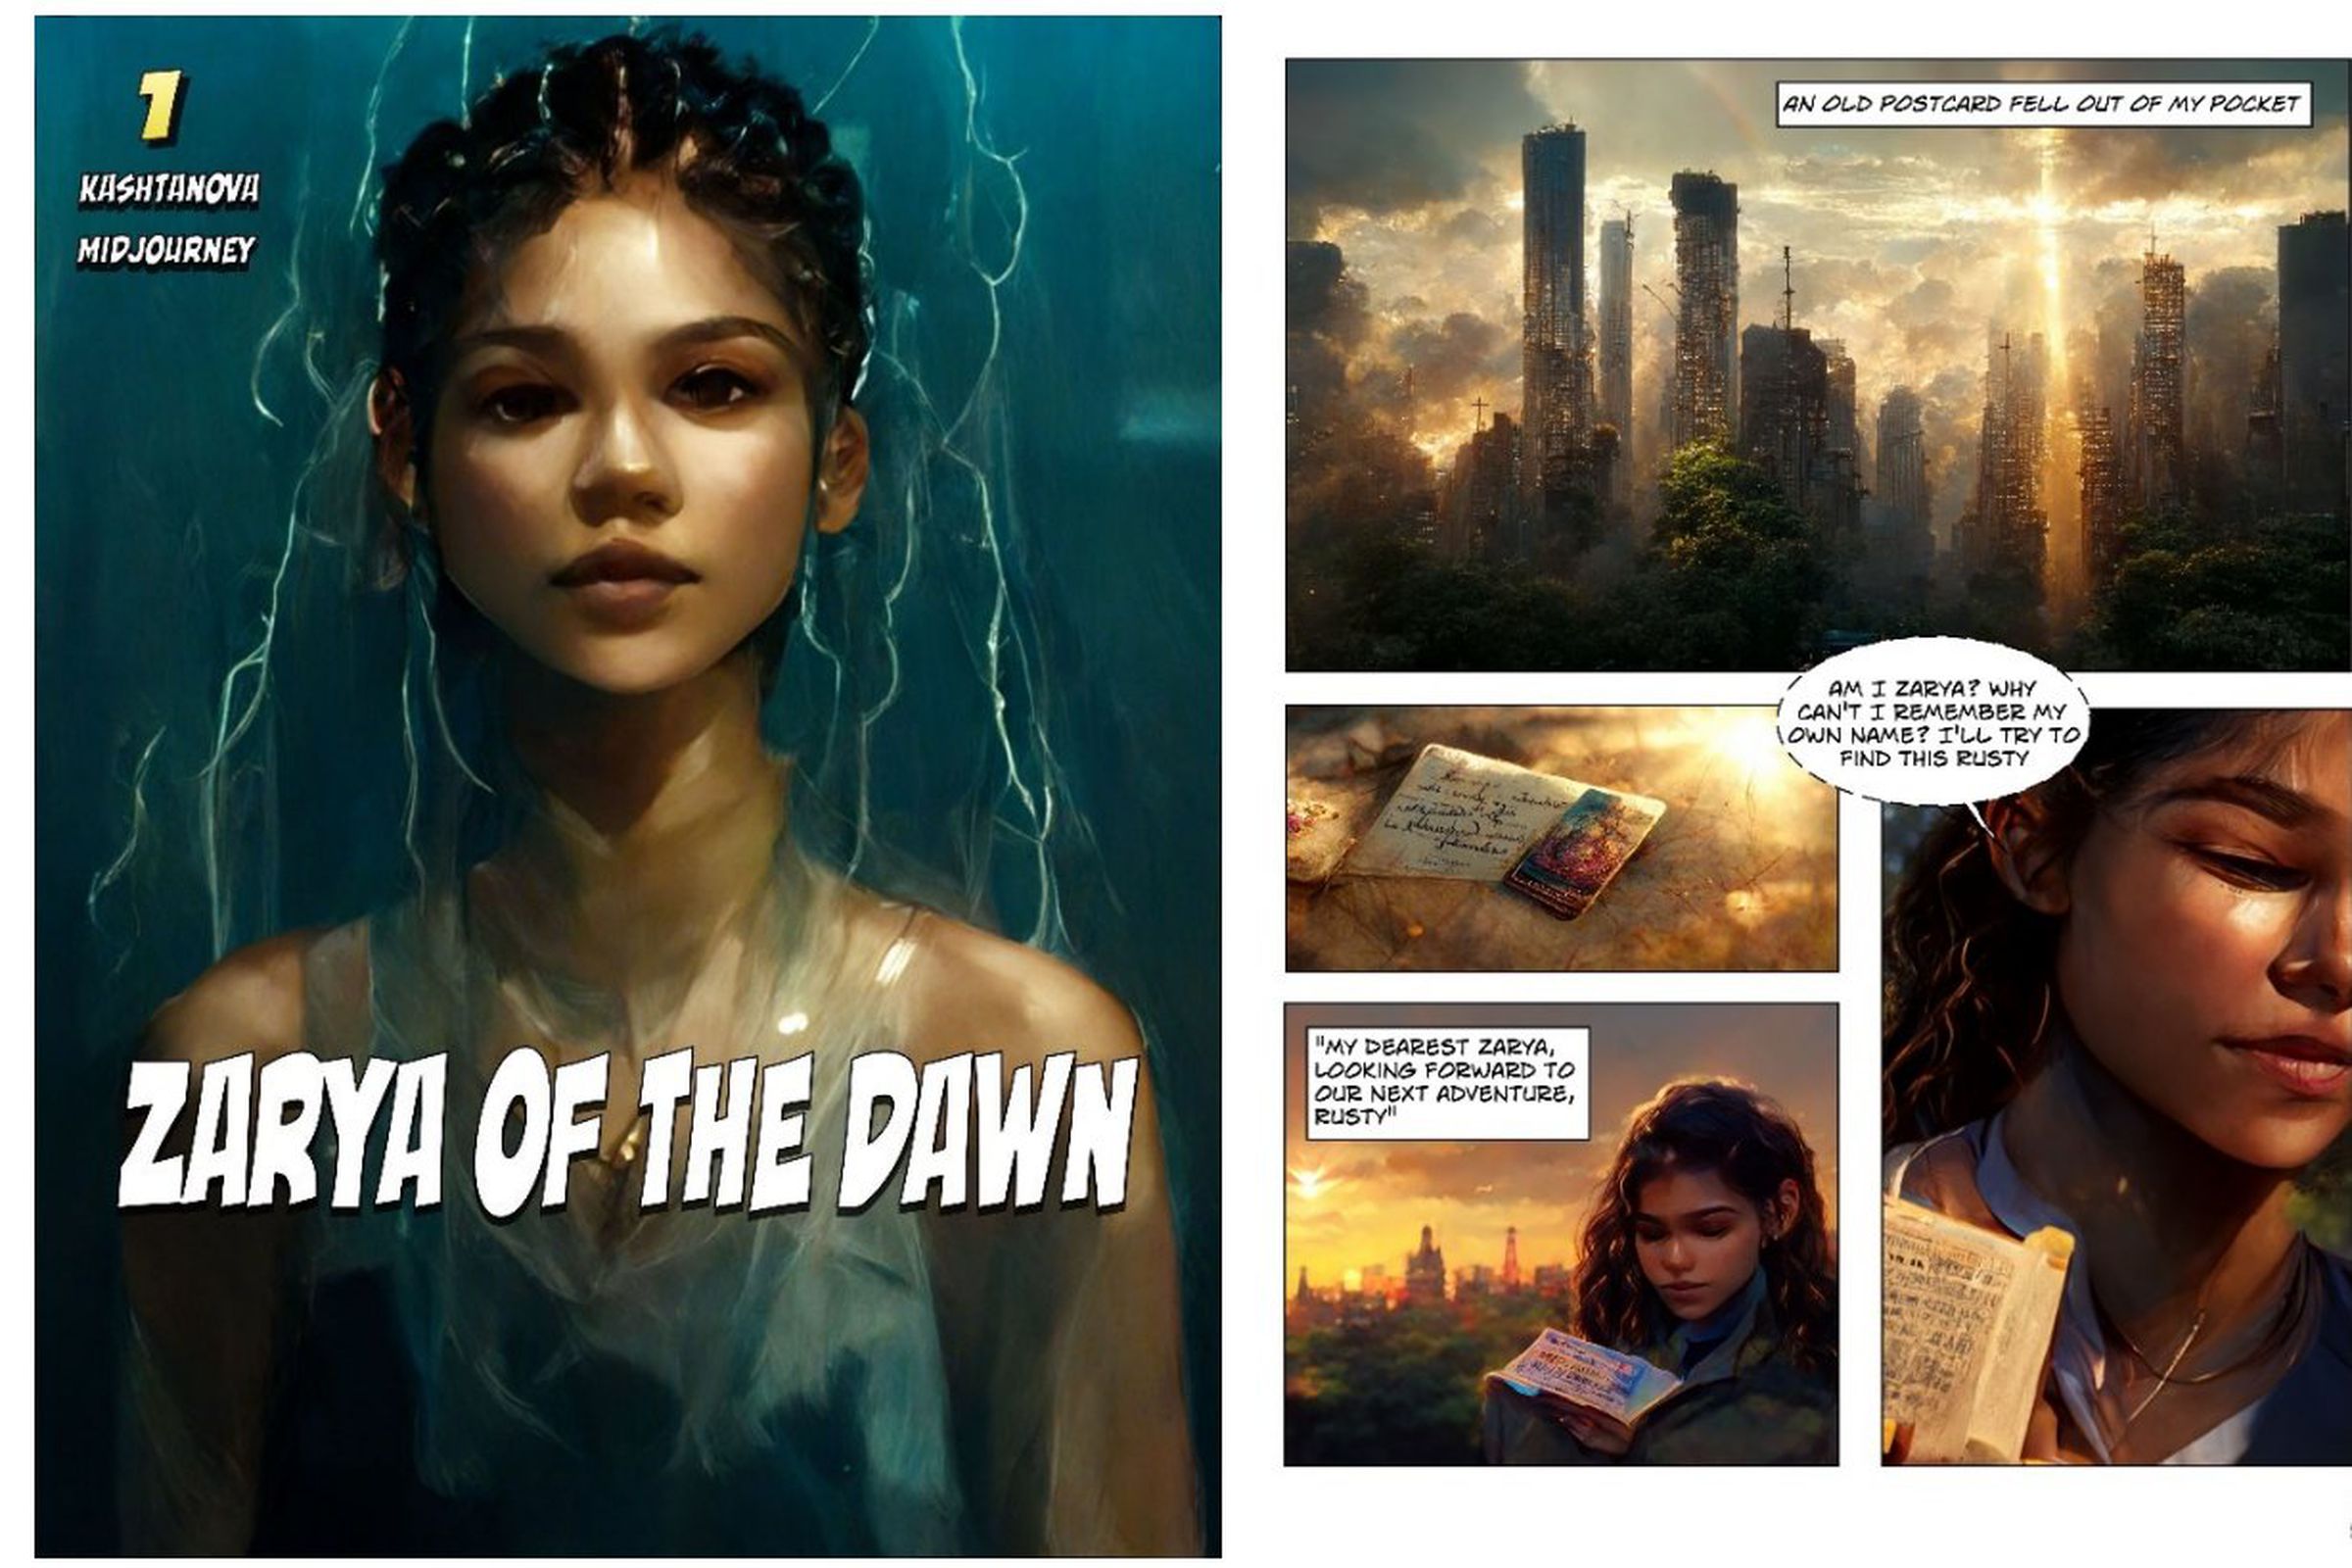 A reproduction of the cover page of Zarya of the Dawn, showing an AI-generated drawing of a young woman with braids behind the book’s title.